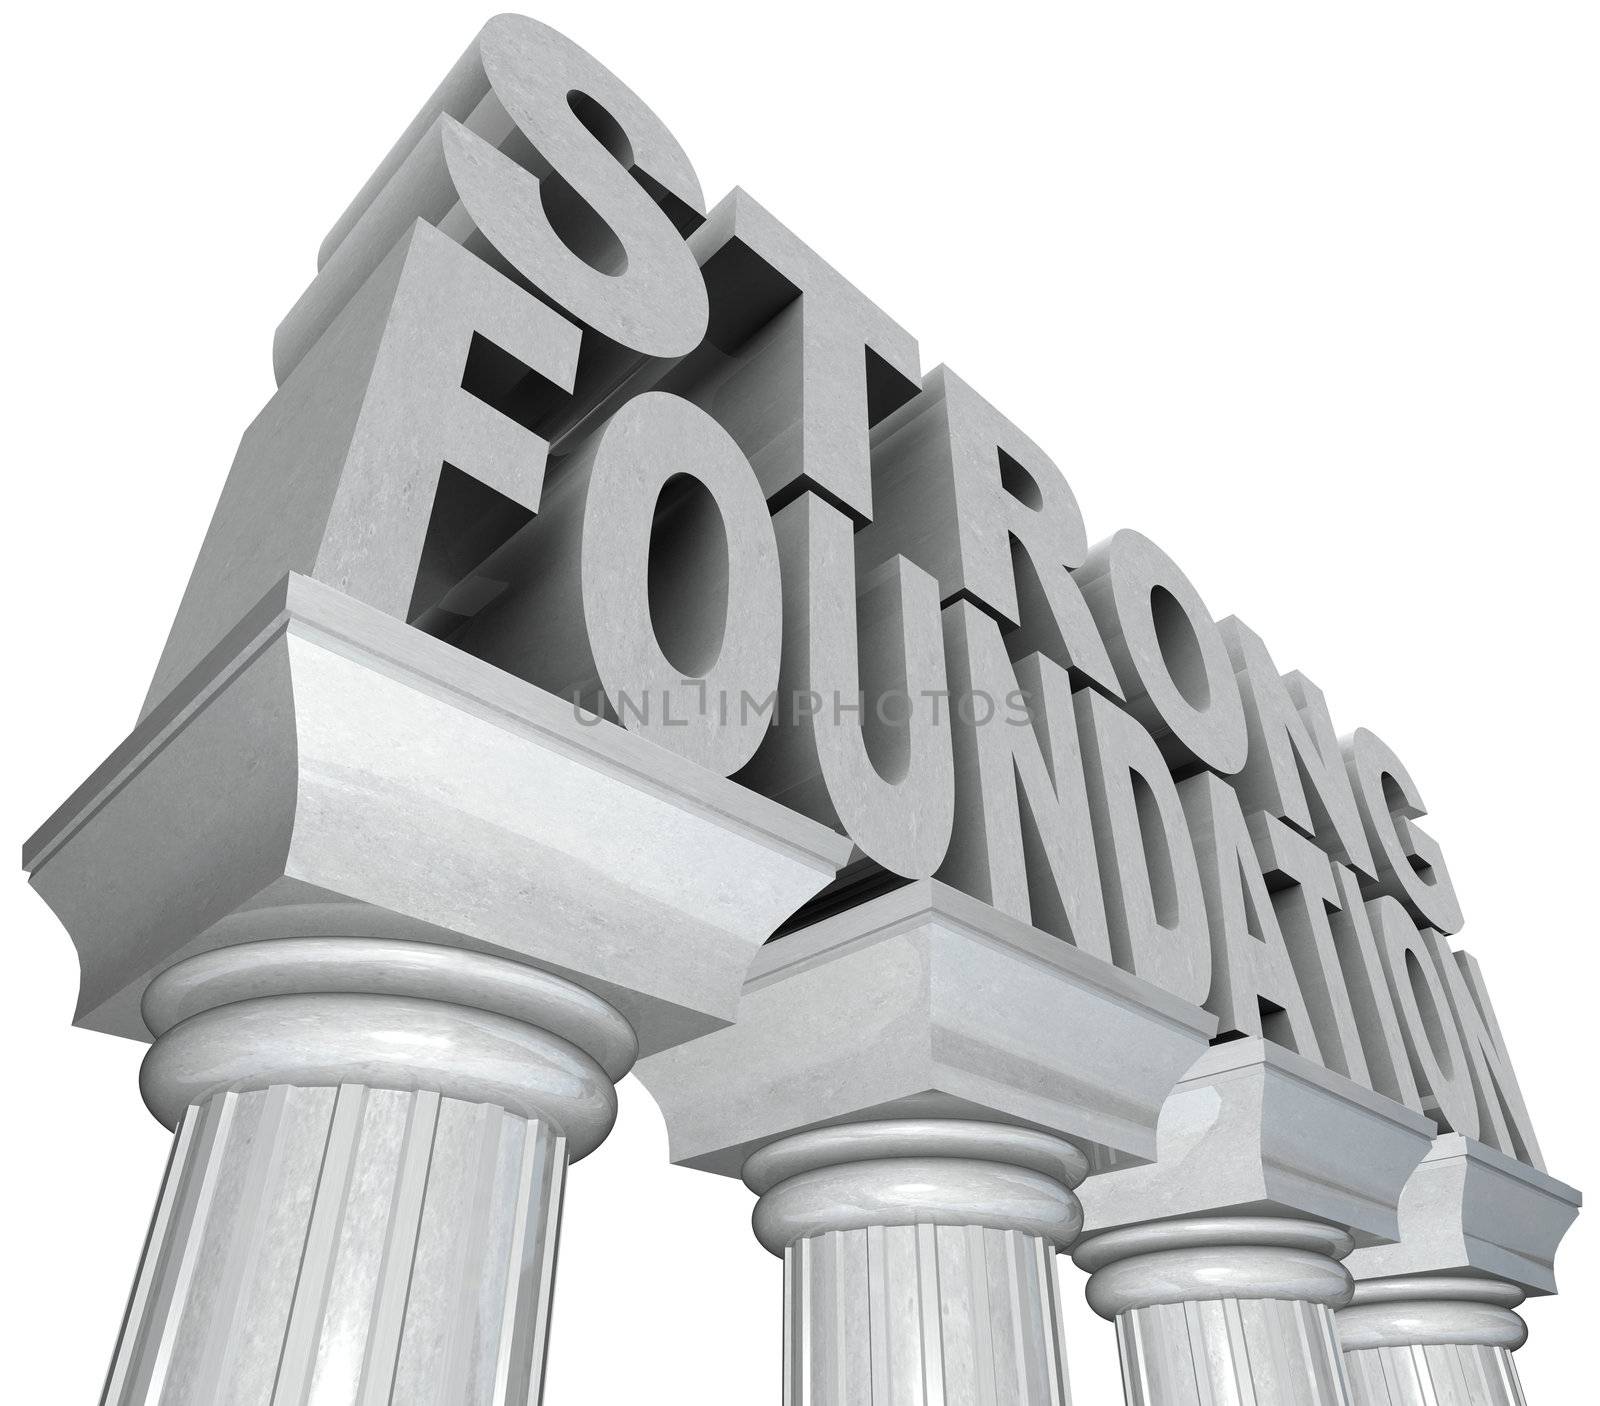 The words Strong Foundation in marble stone letters standing on white grantie pillars or columns to convey strength and resilience as well as historical power and experience